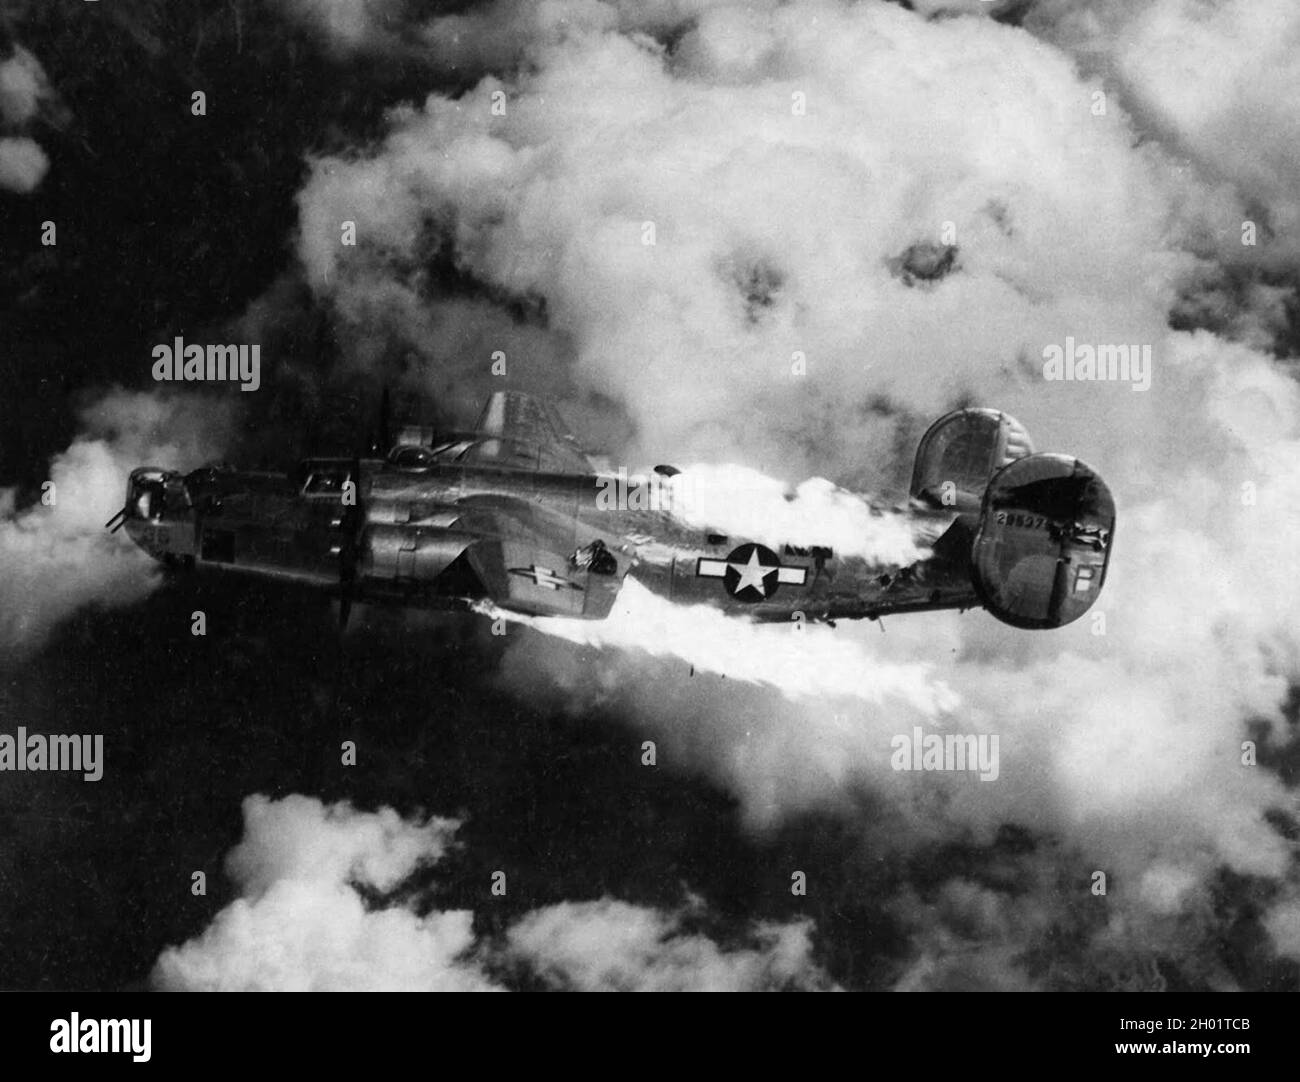 A Consolidated B-24 Liberator  bomber burning after being hit by flak during a raid. Stock Photo